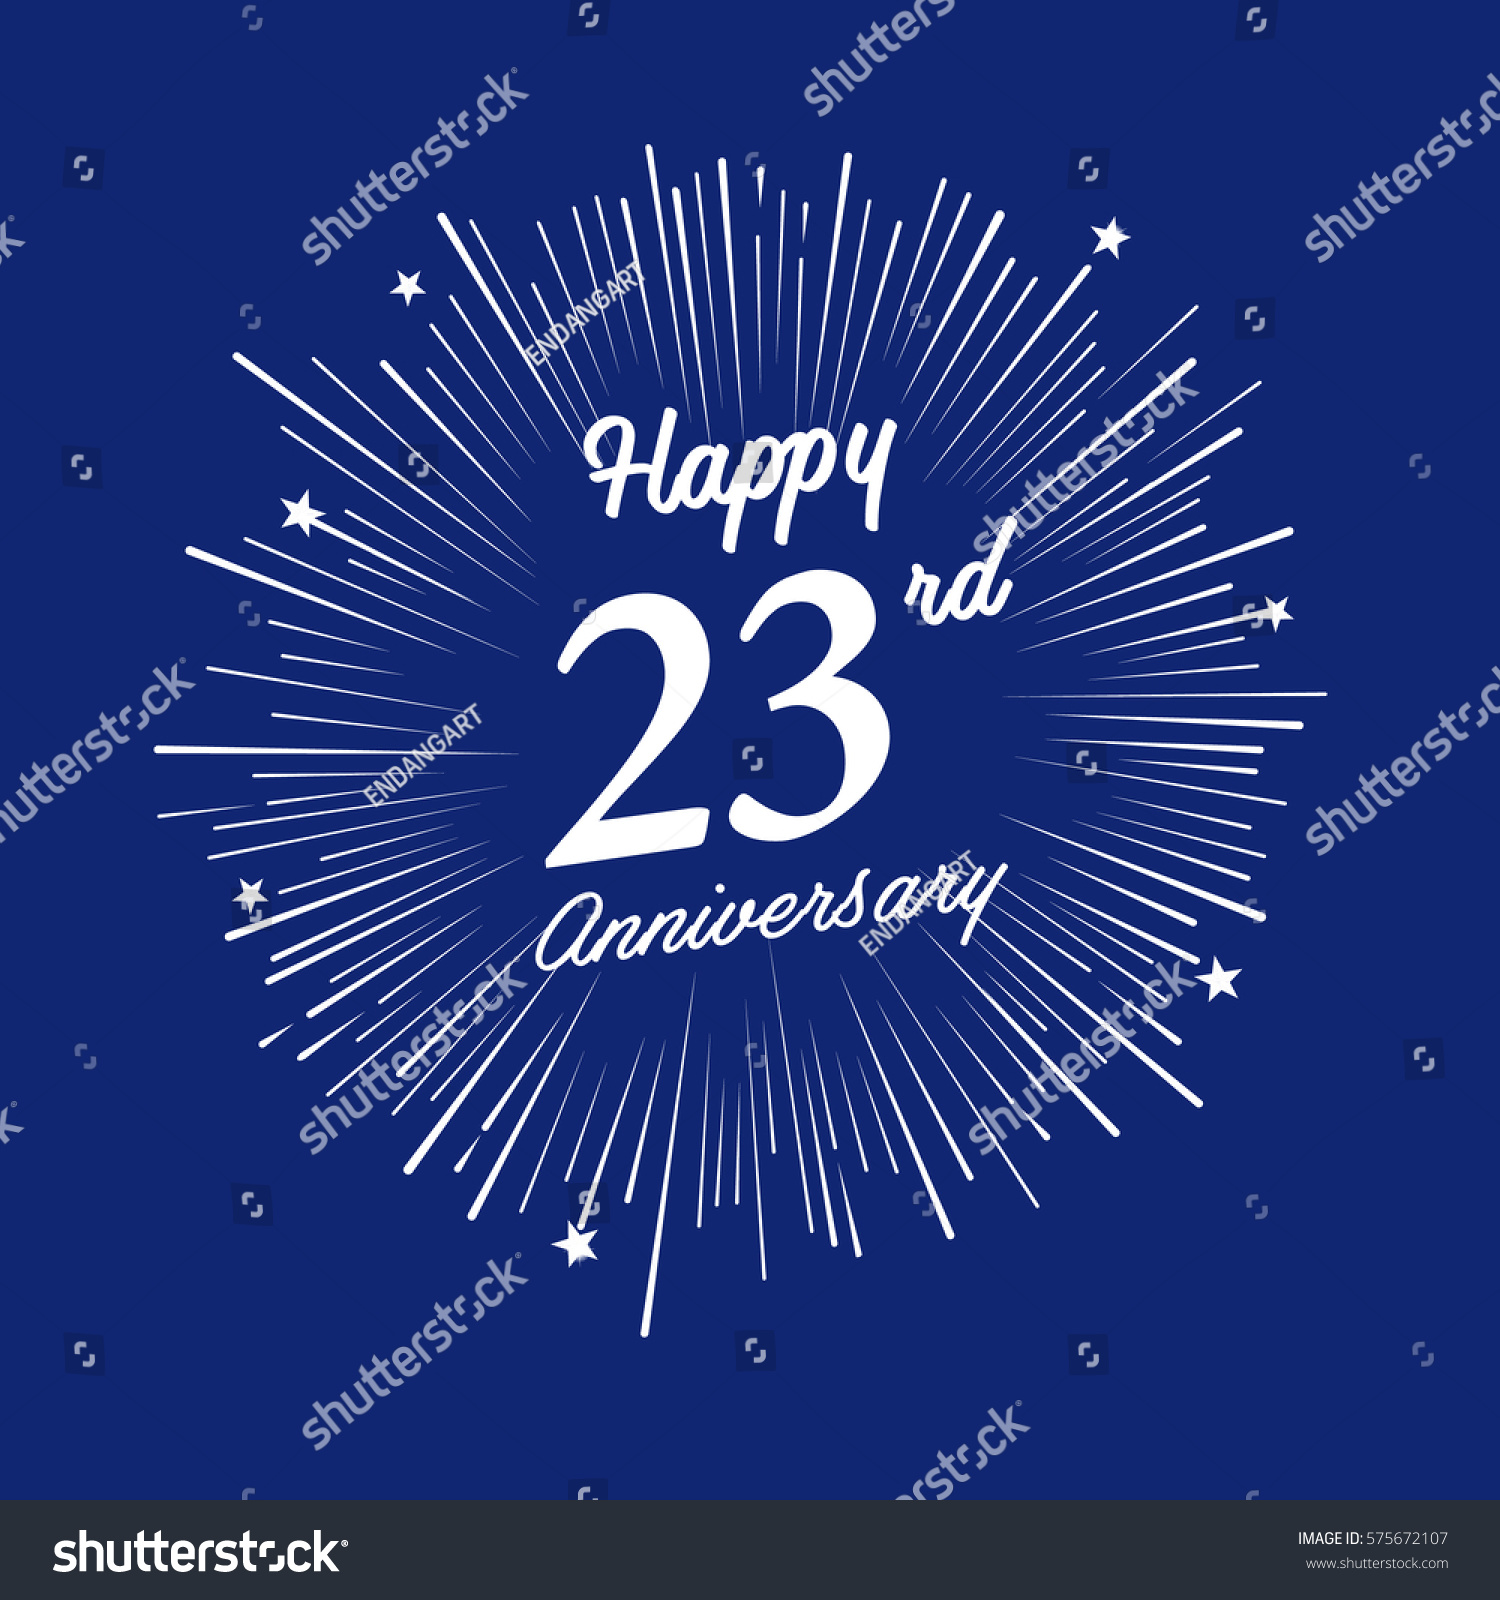 stock-vector-happy-rd-anniversary-with-fireworks-and-star-on-blue-background-greeting-card-banner-poster-575672107.jpg